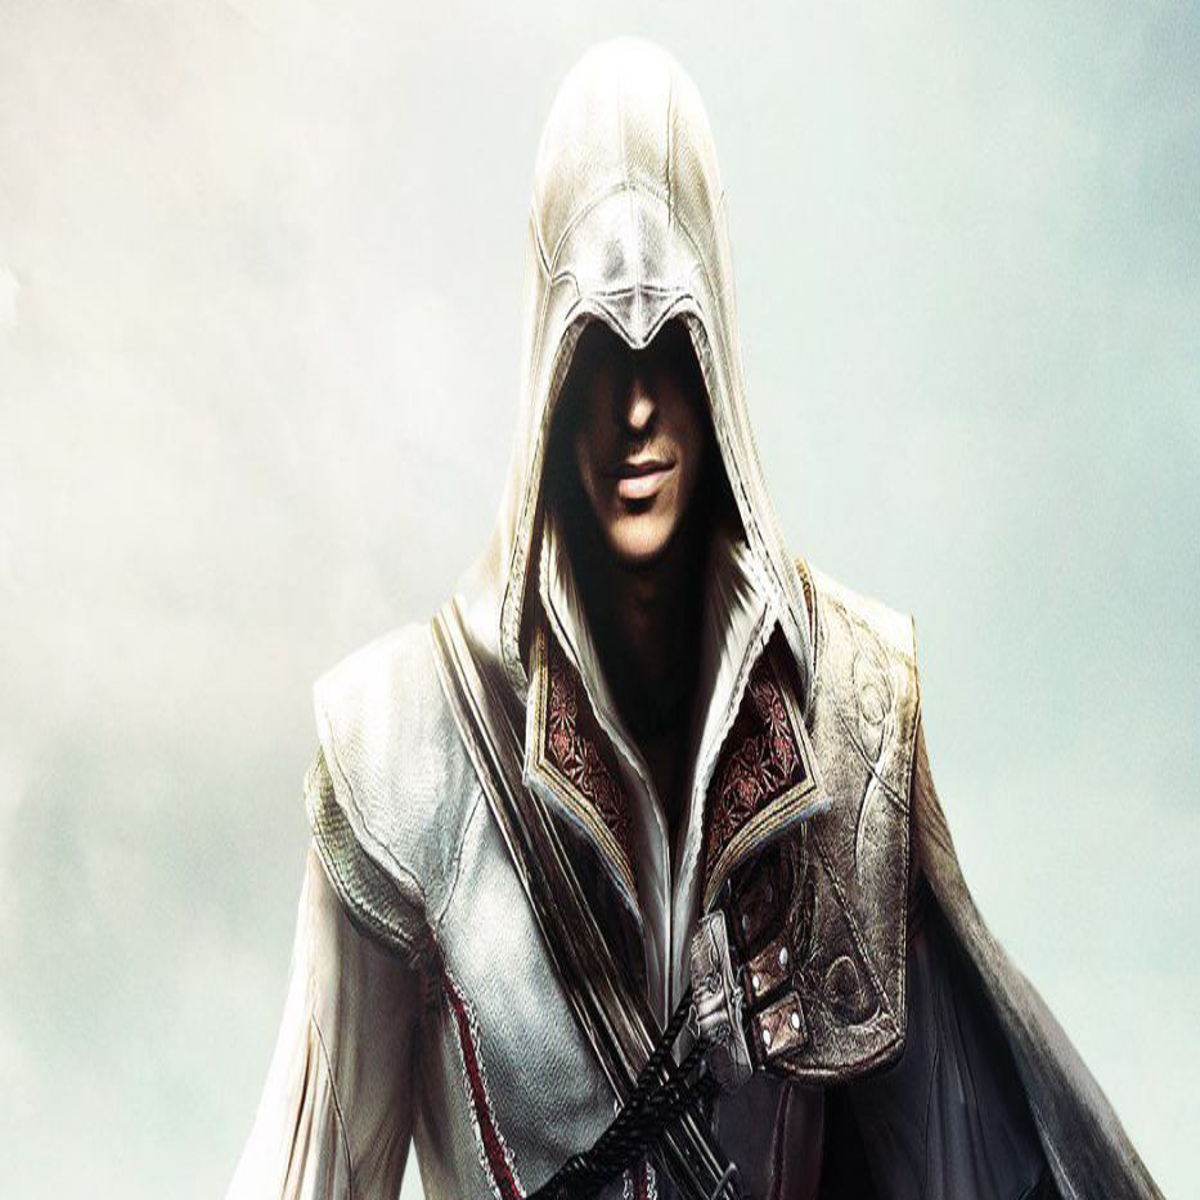  Assassin's Creed: The Ezio Collection - PS4 [Digital